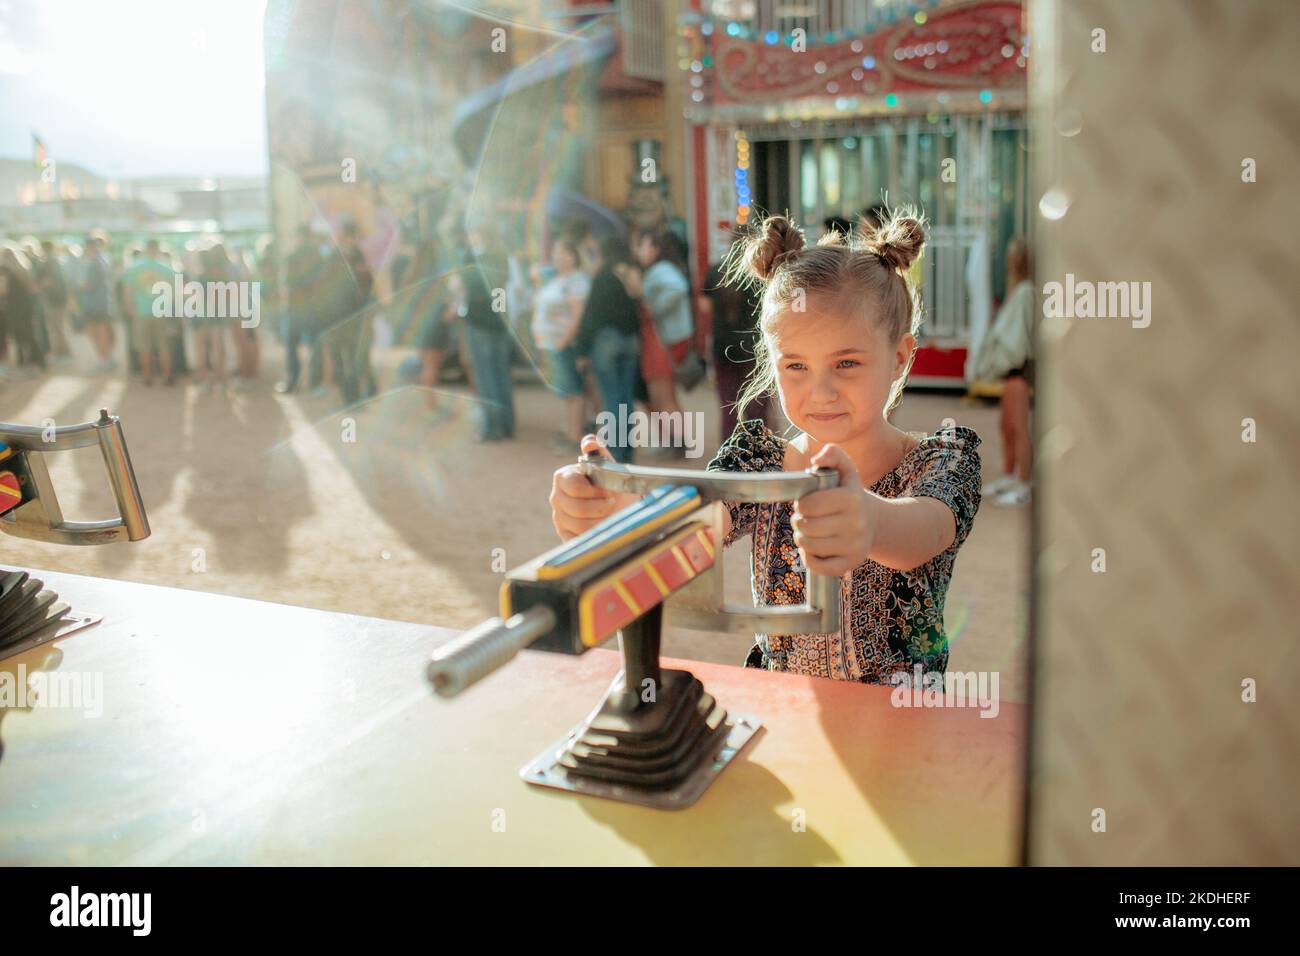 Young girl playing a carnival game on sunny day Stock Photo